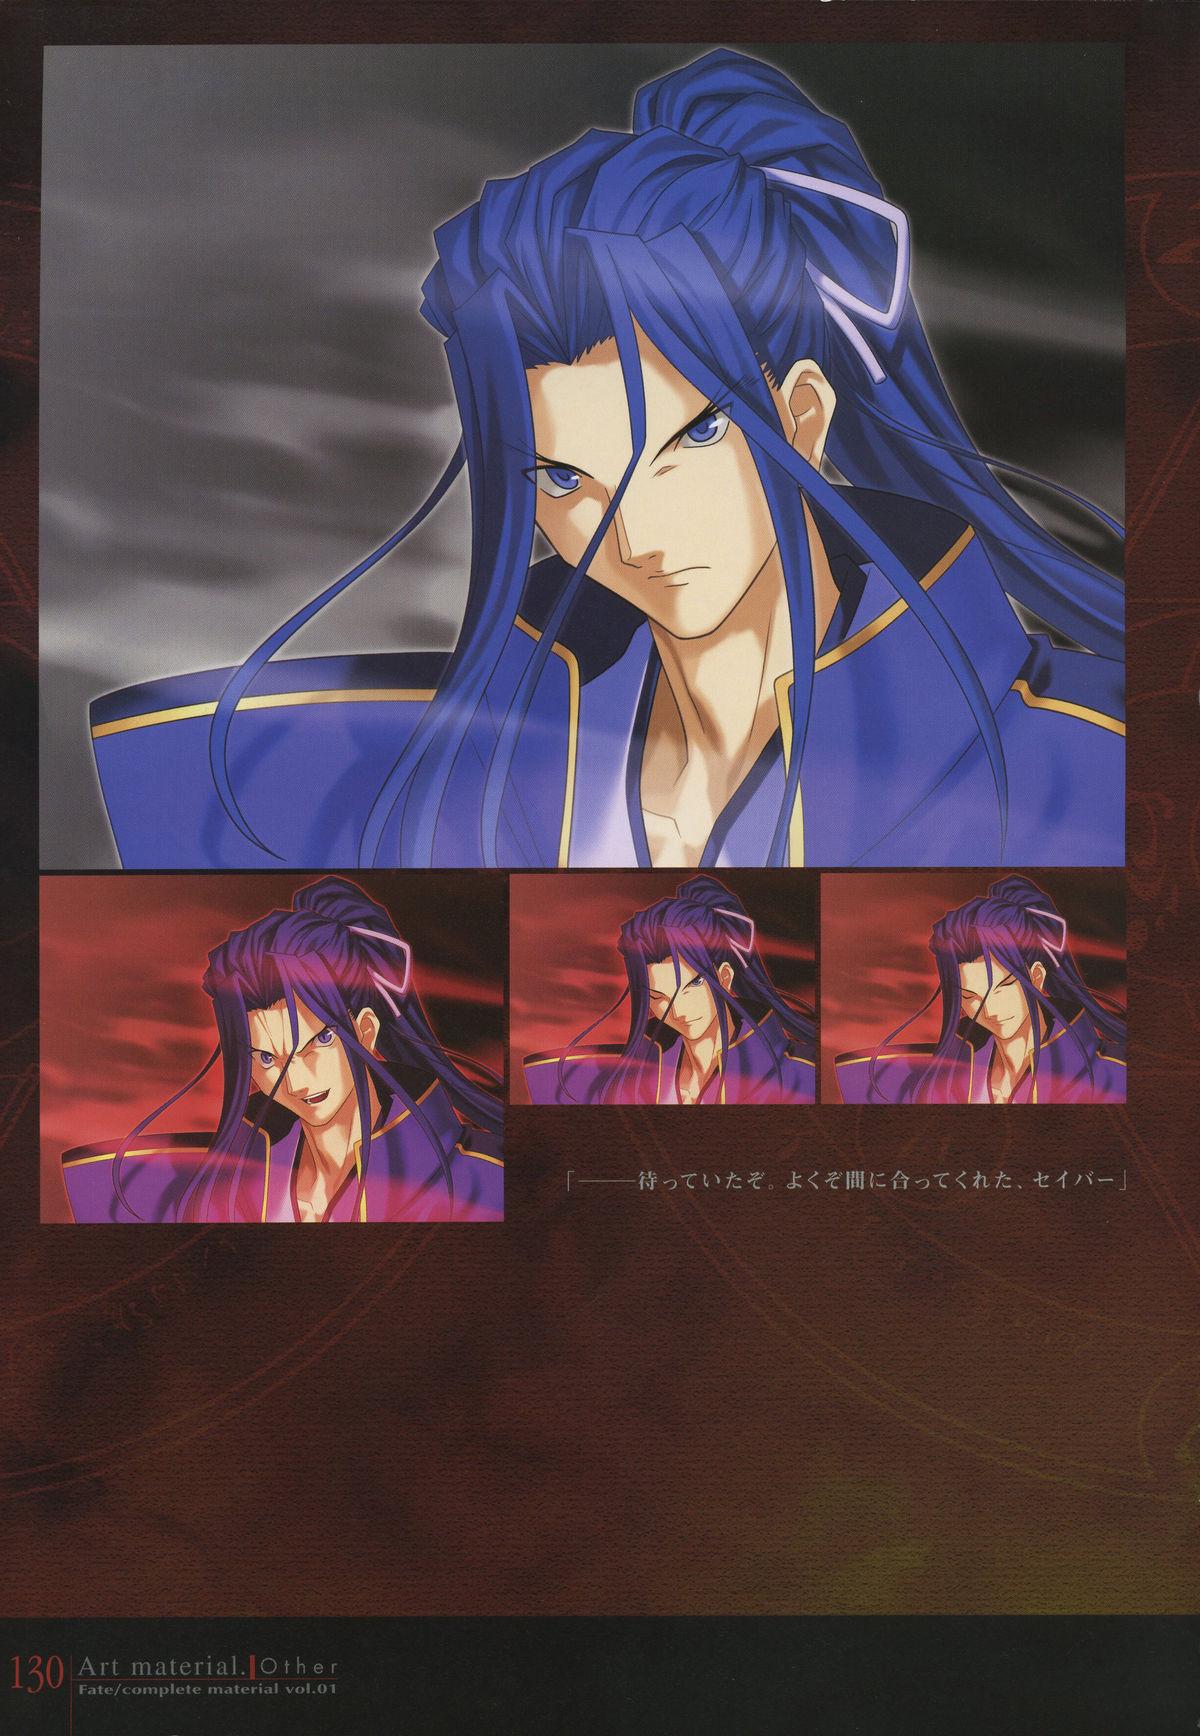 Fate/complete material I - Art material. 134